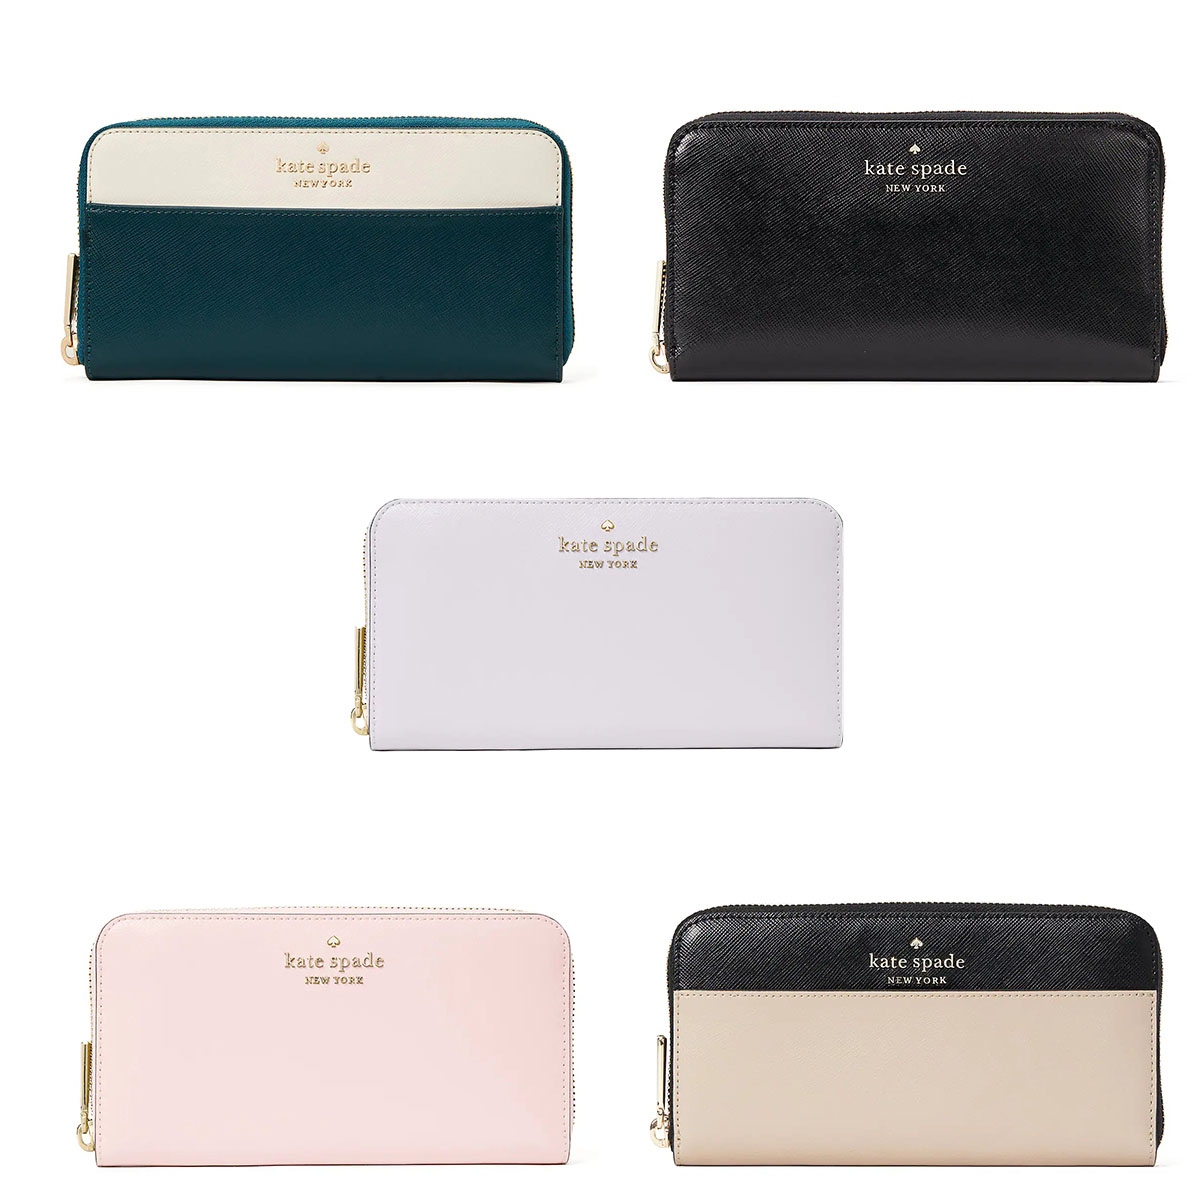 Kate Spade 24-Hour Flash Deal: Get a $229 Wallet for Just $49 - E! Online